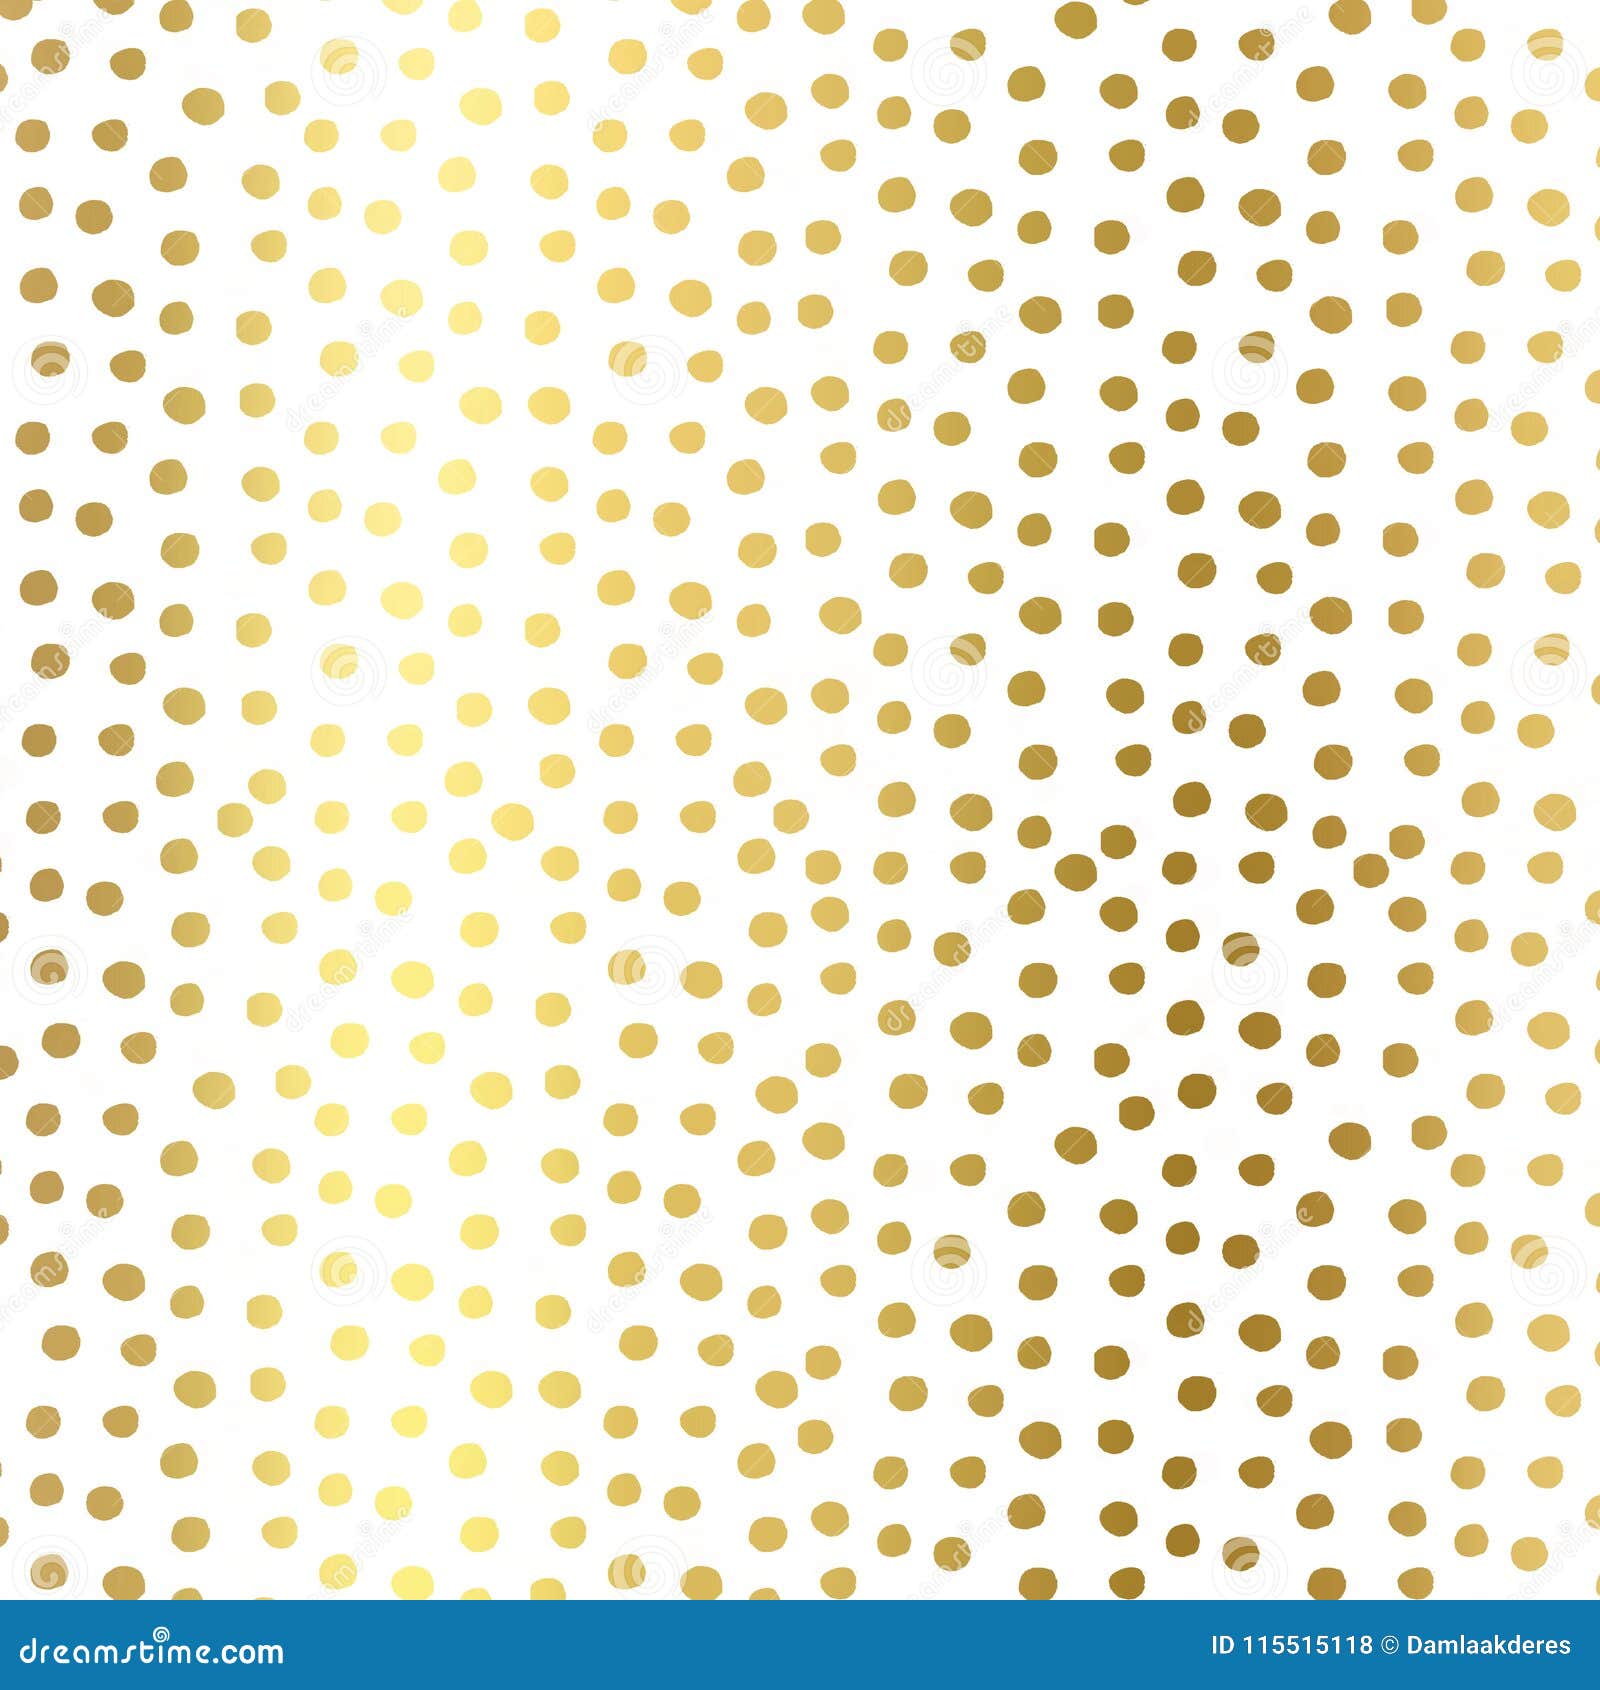 Glitter Dots Geometric On White Background Gold Texture